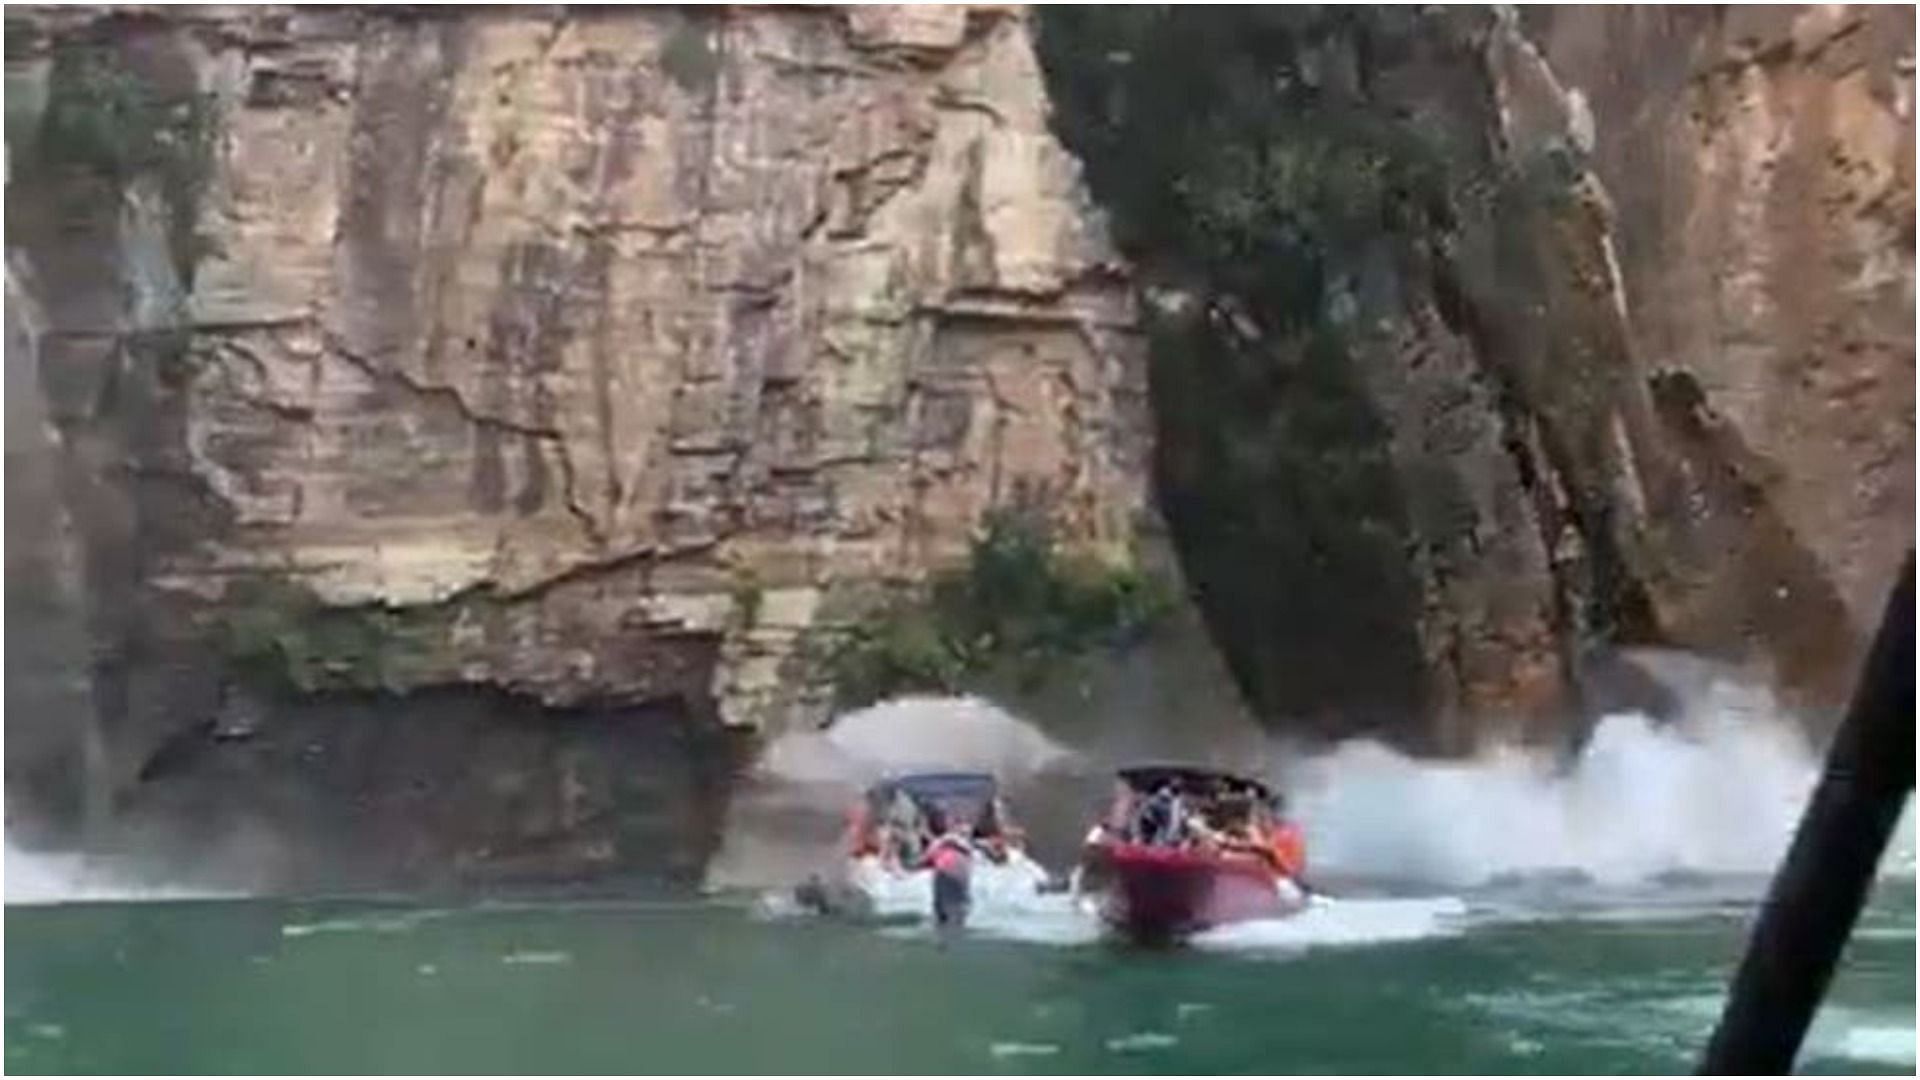 Brazil canyon collapses on motorboats (Image via Twitter)